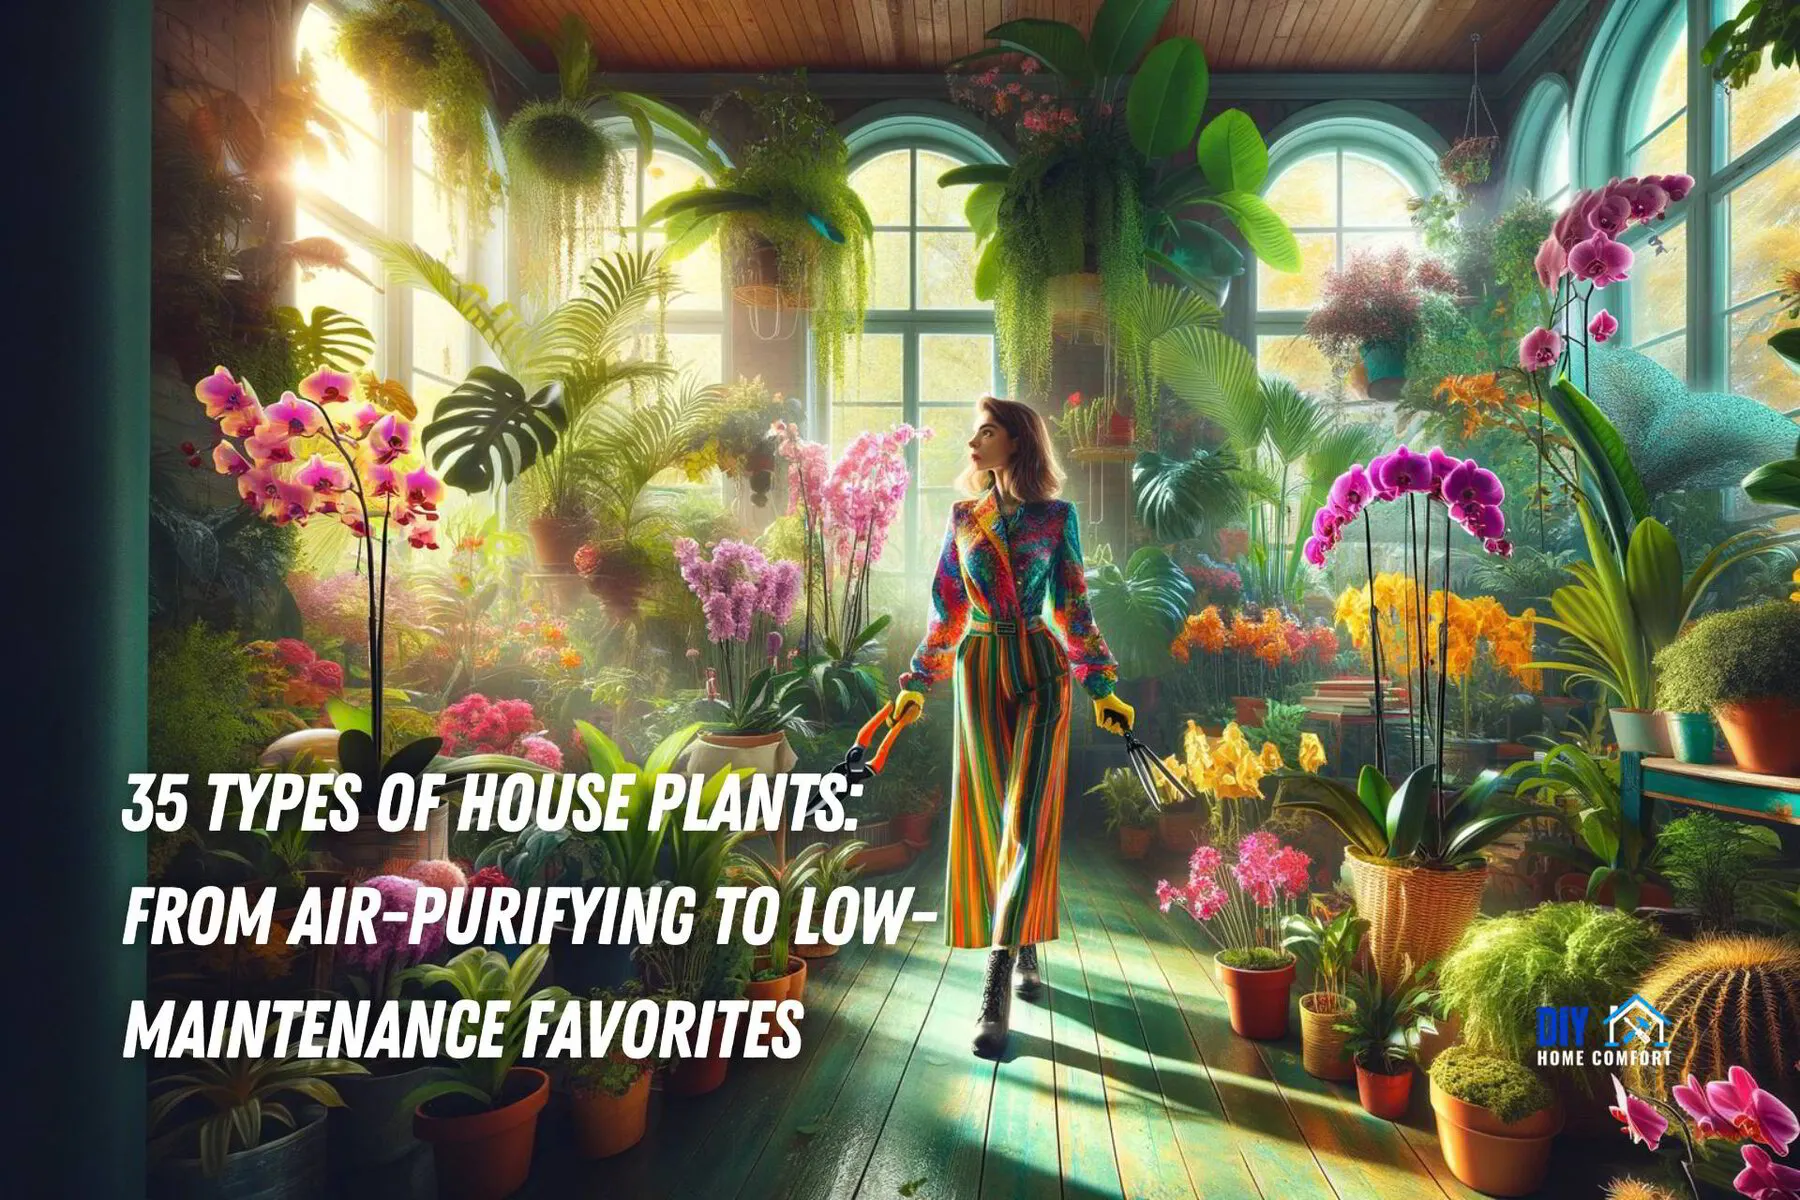 35 Types of House Plants: From Air-Purifying to Low-Maintenance Favorites | DIY Home Comfort